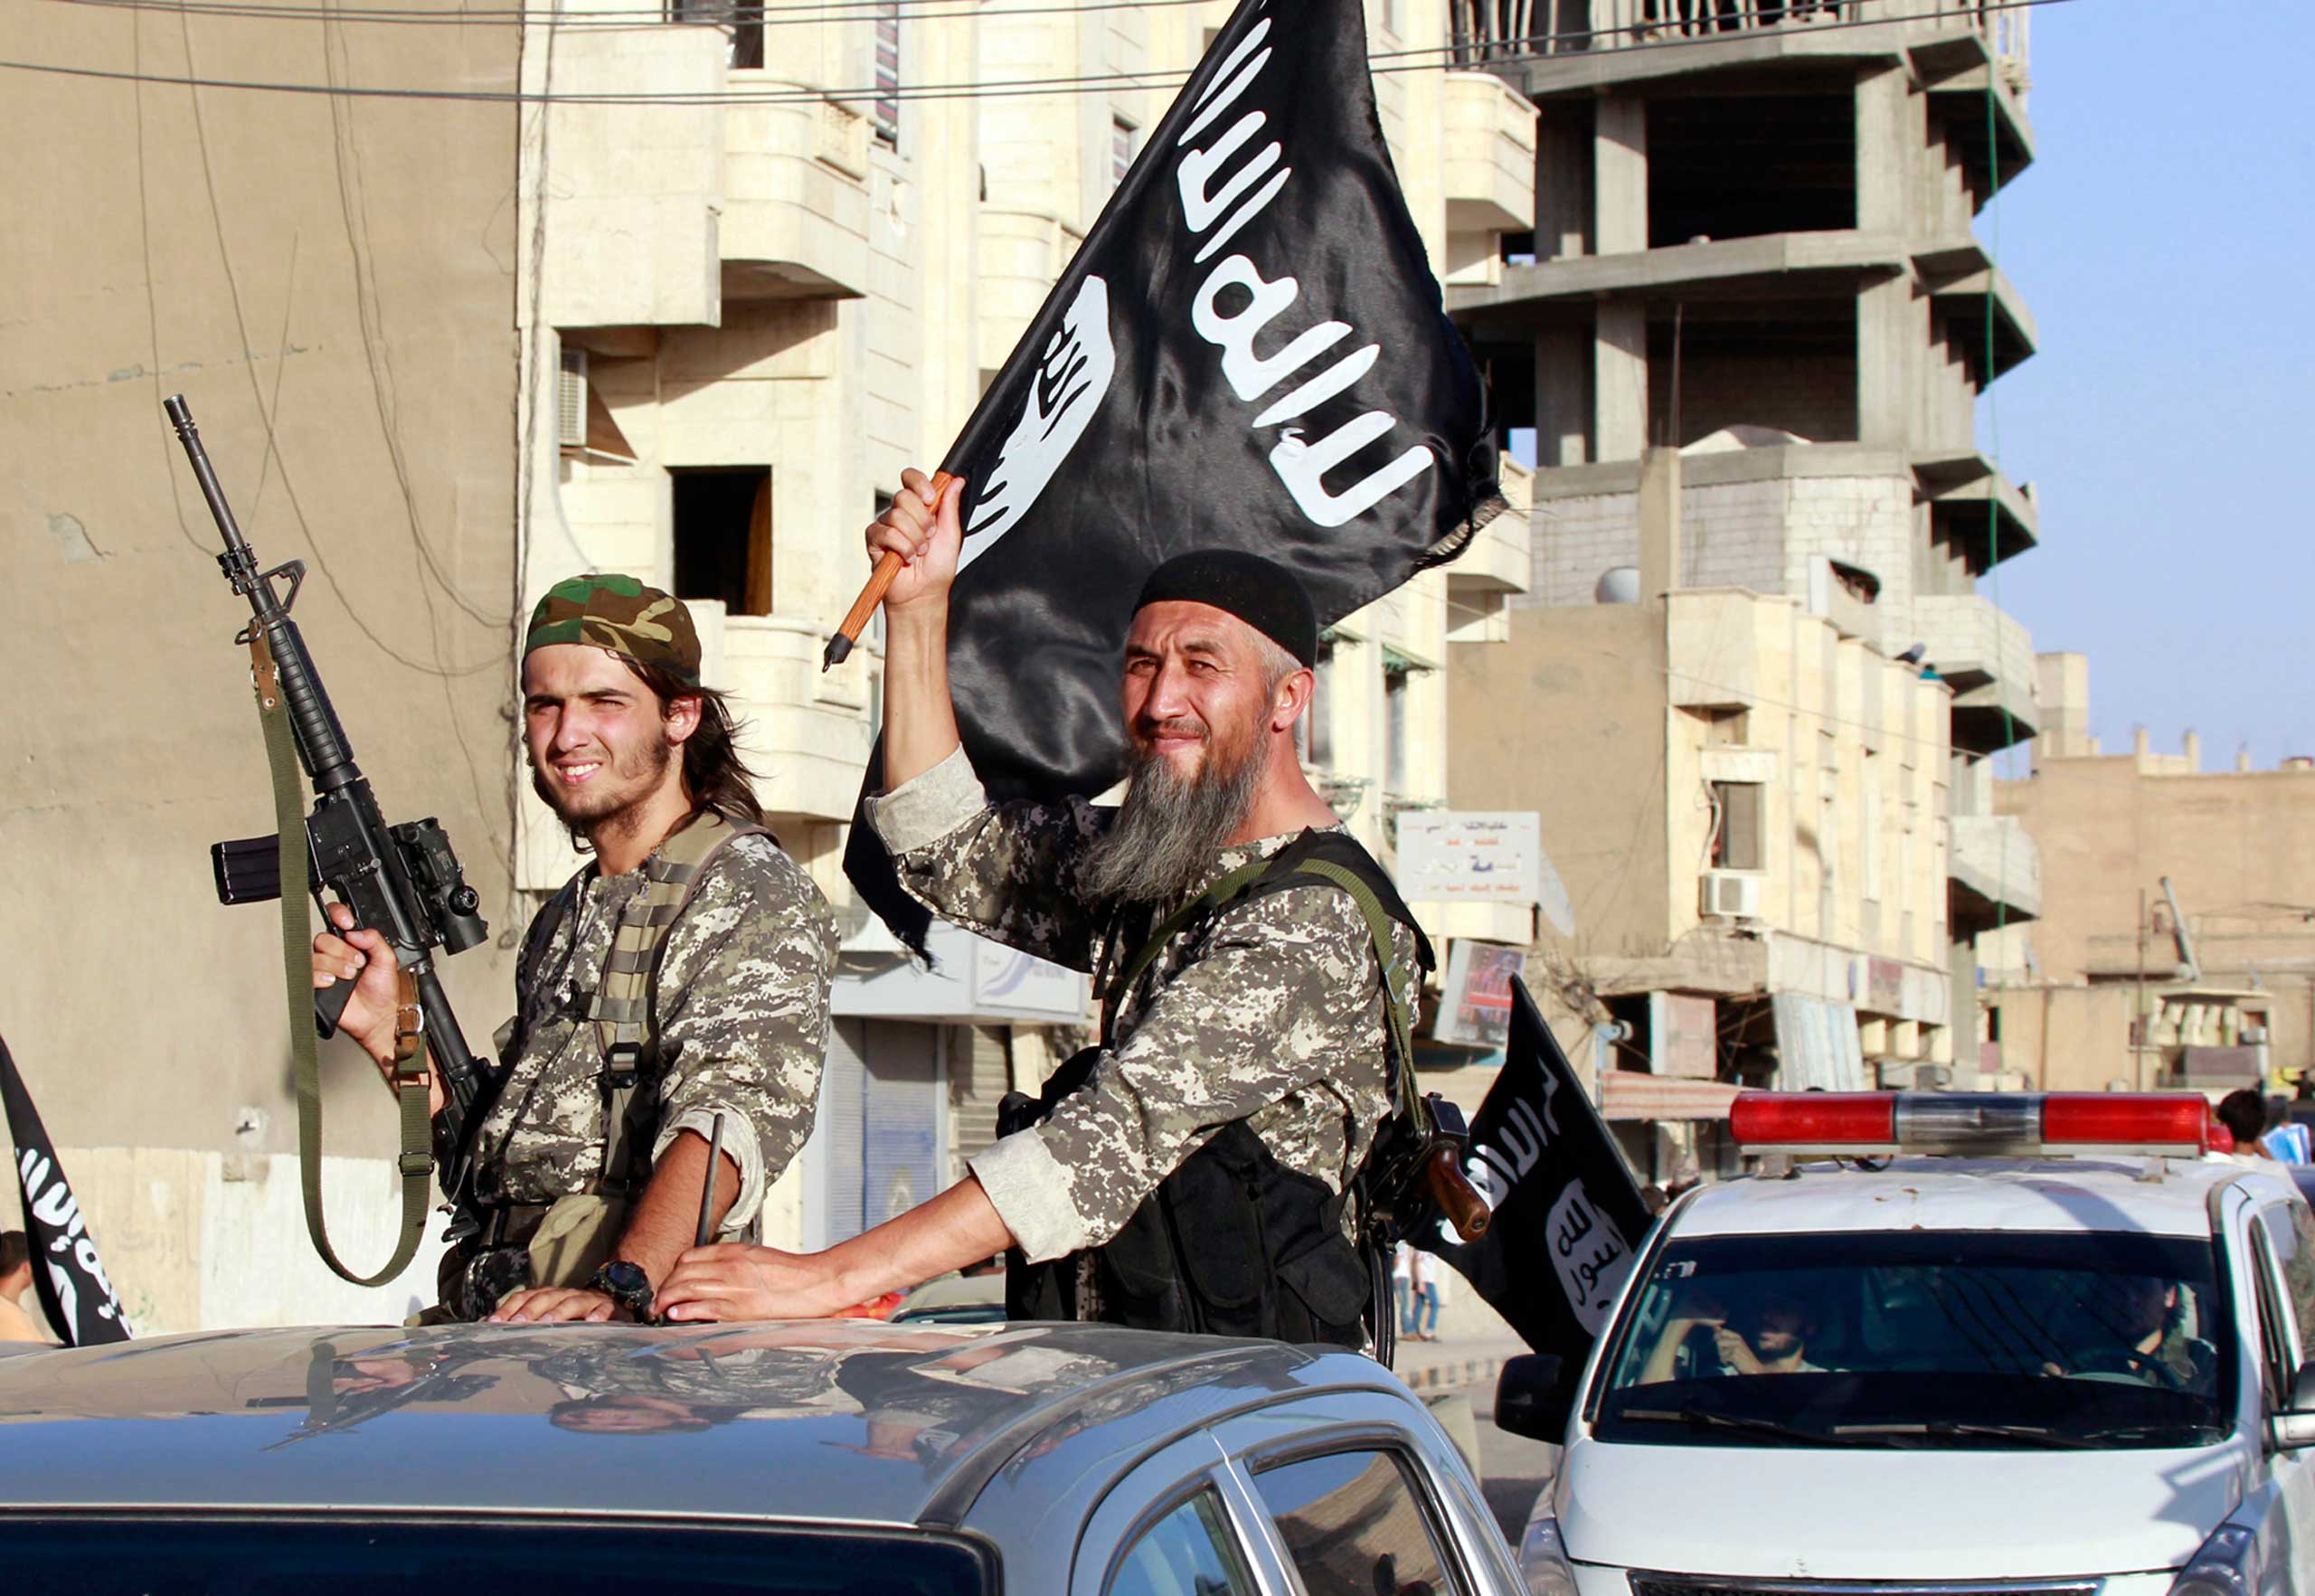 Militant Islamist fighters wave flags as they take part in a military parade along the streets of Syria's northern Raqqa province in Syria, June 30, 2014. (Reuters)